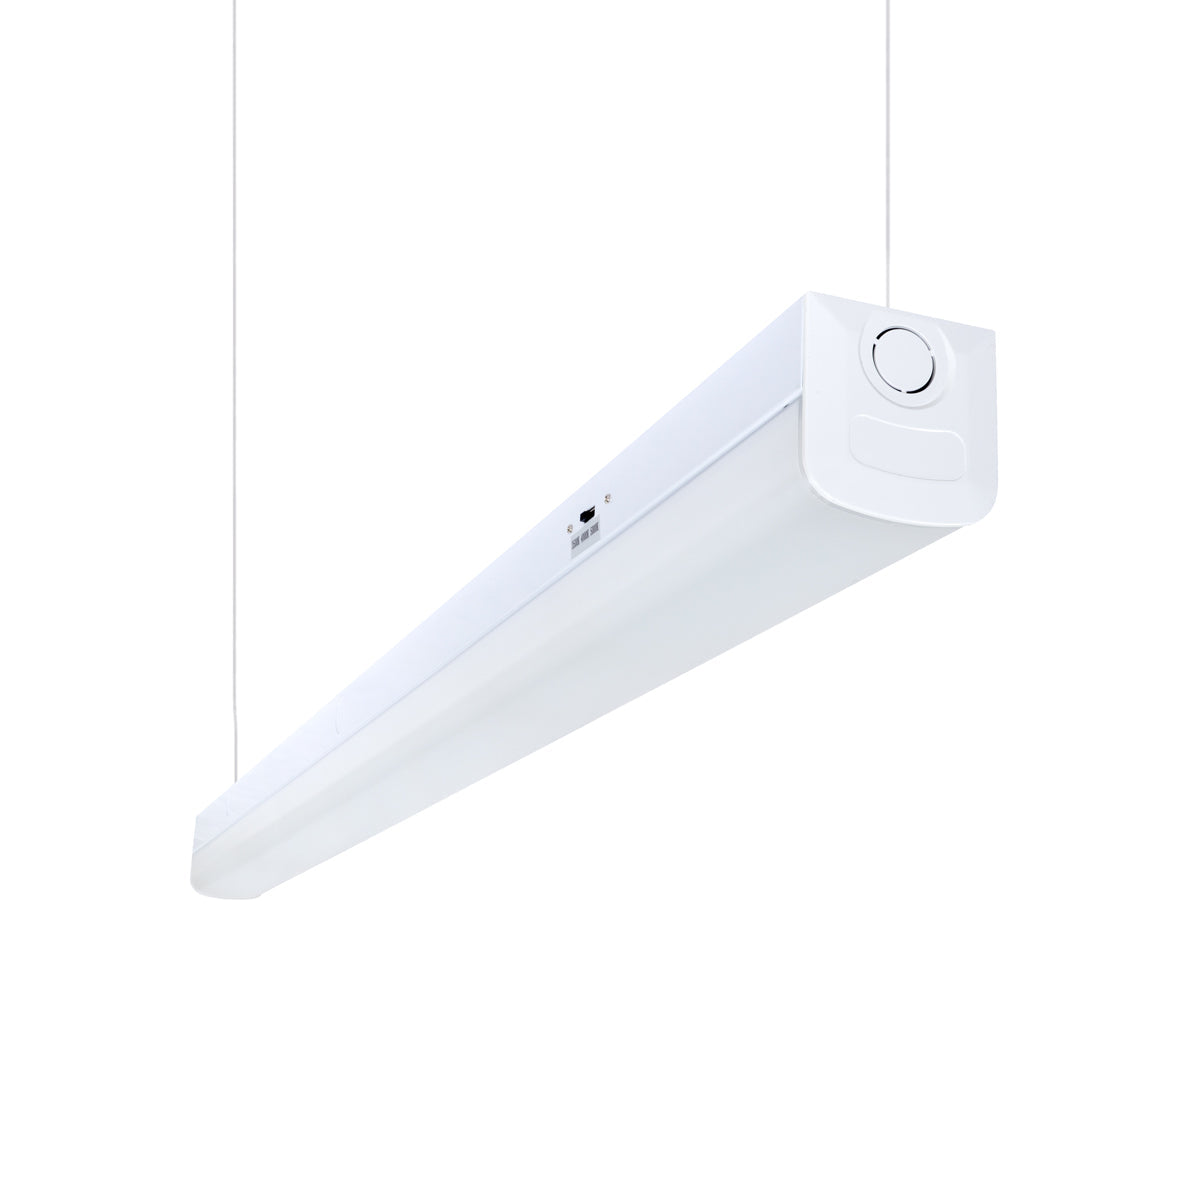 4FT LED Linear Fixture - Color & Wattage Selectable - Up to 4,600 Lumens